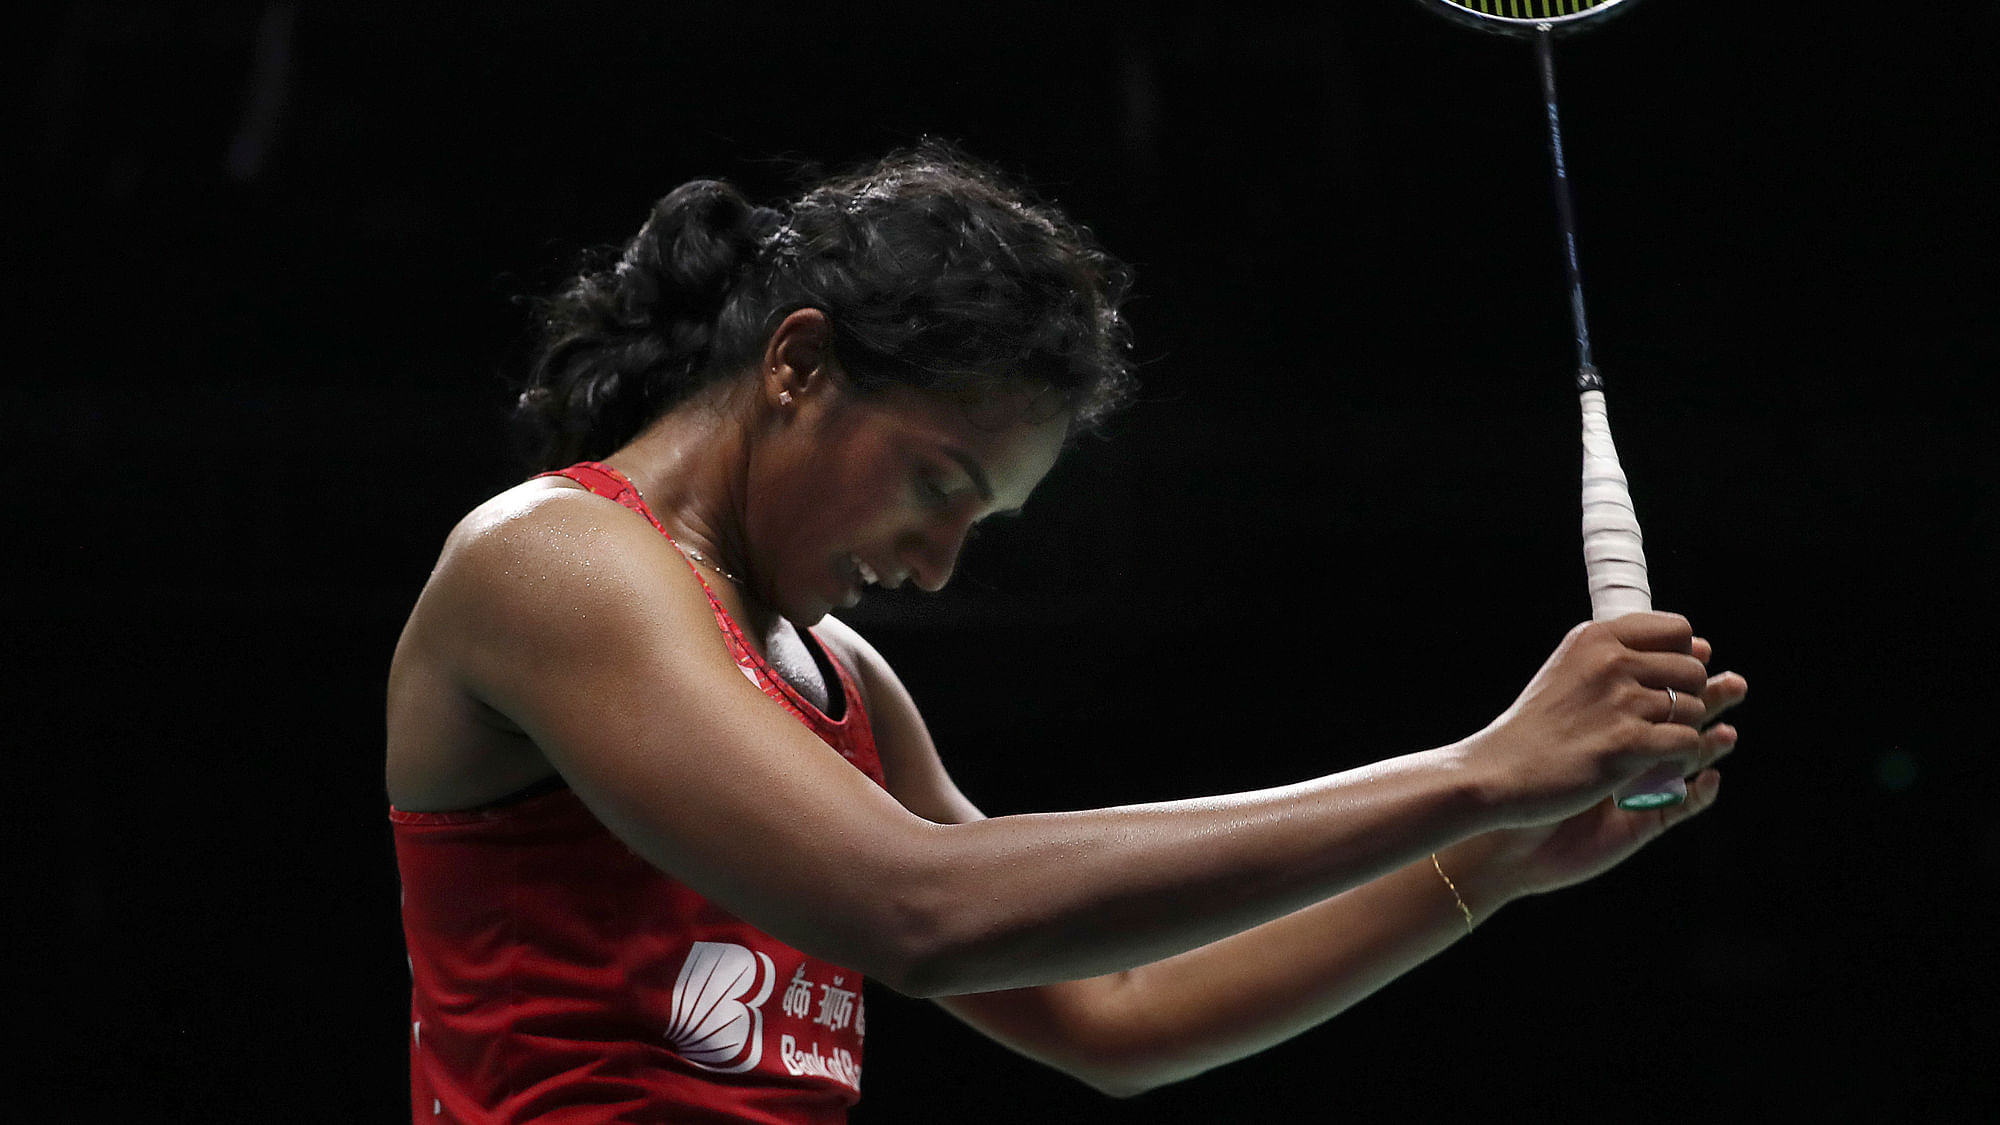 PV Sindhu lost to Carolina Marin in the final of the 2018 Badminton World Championships.